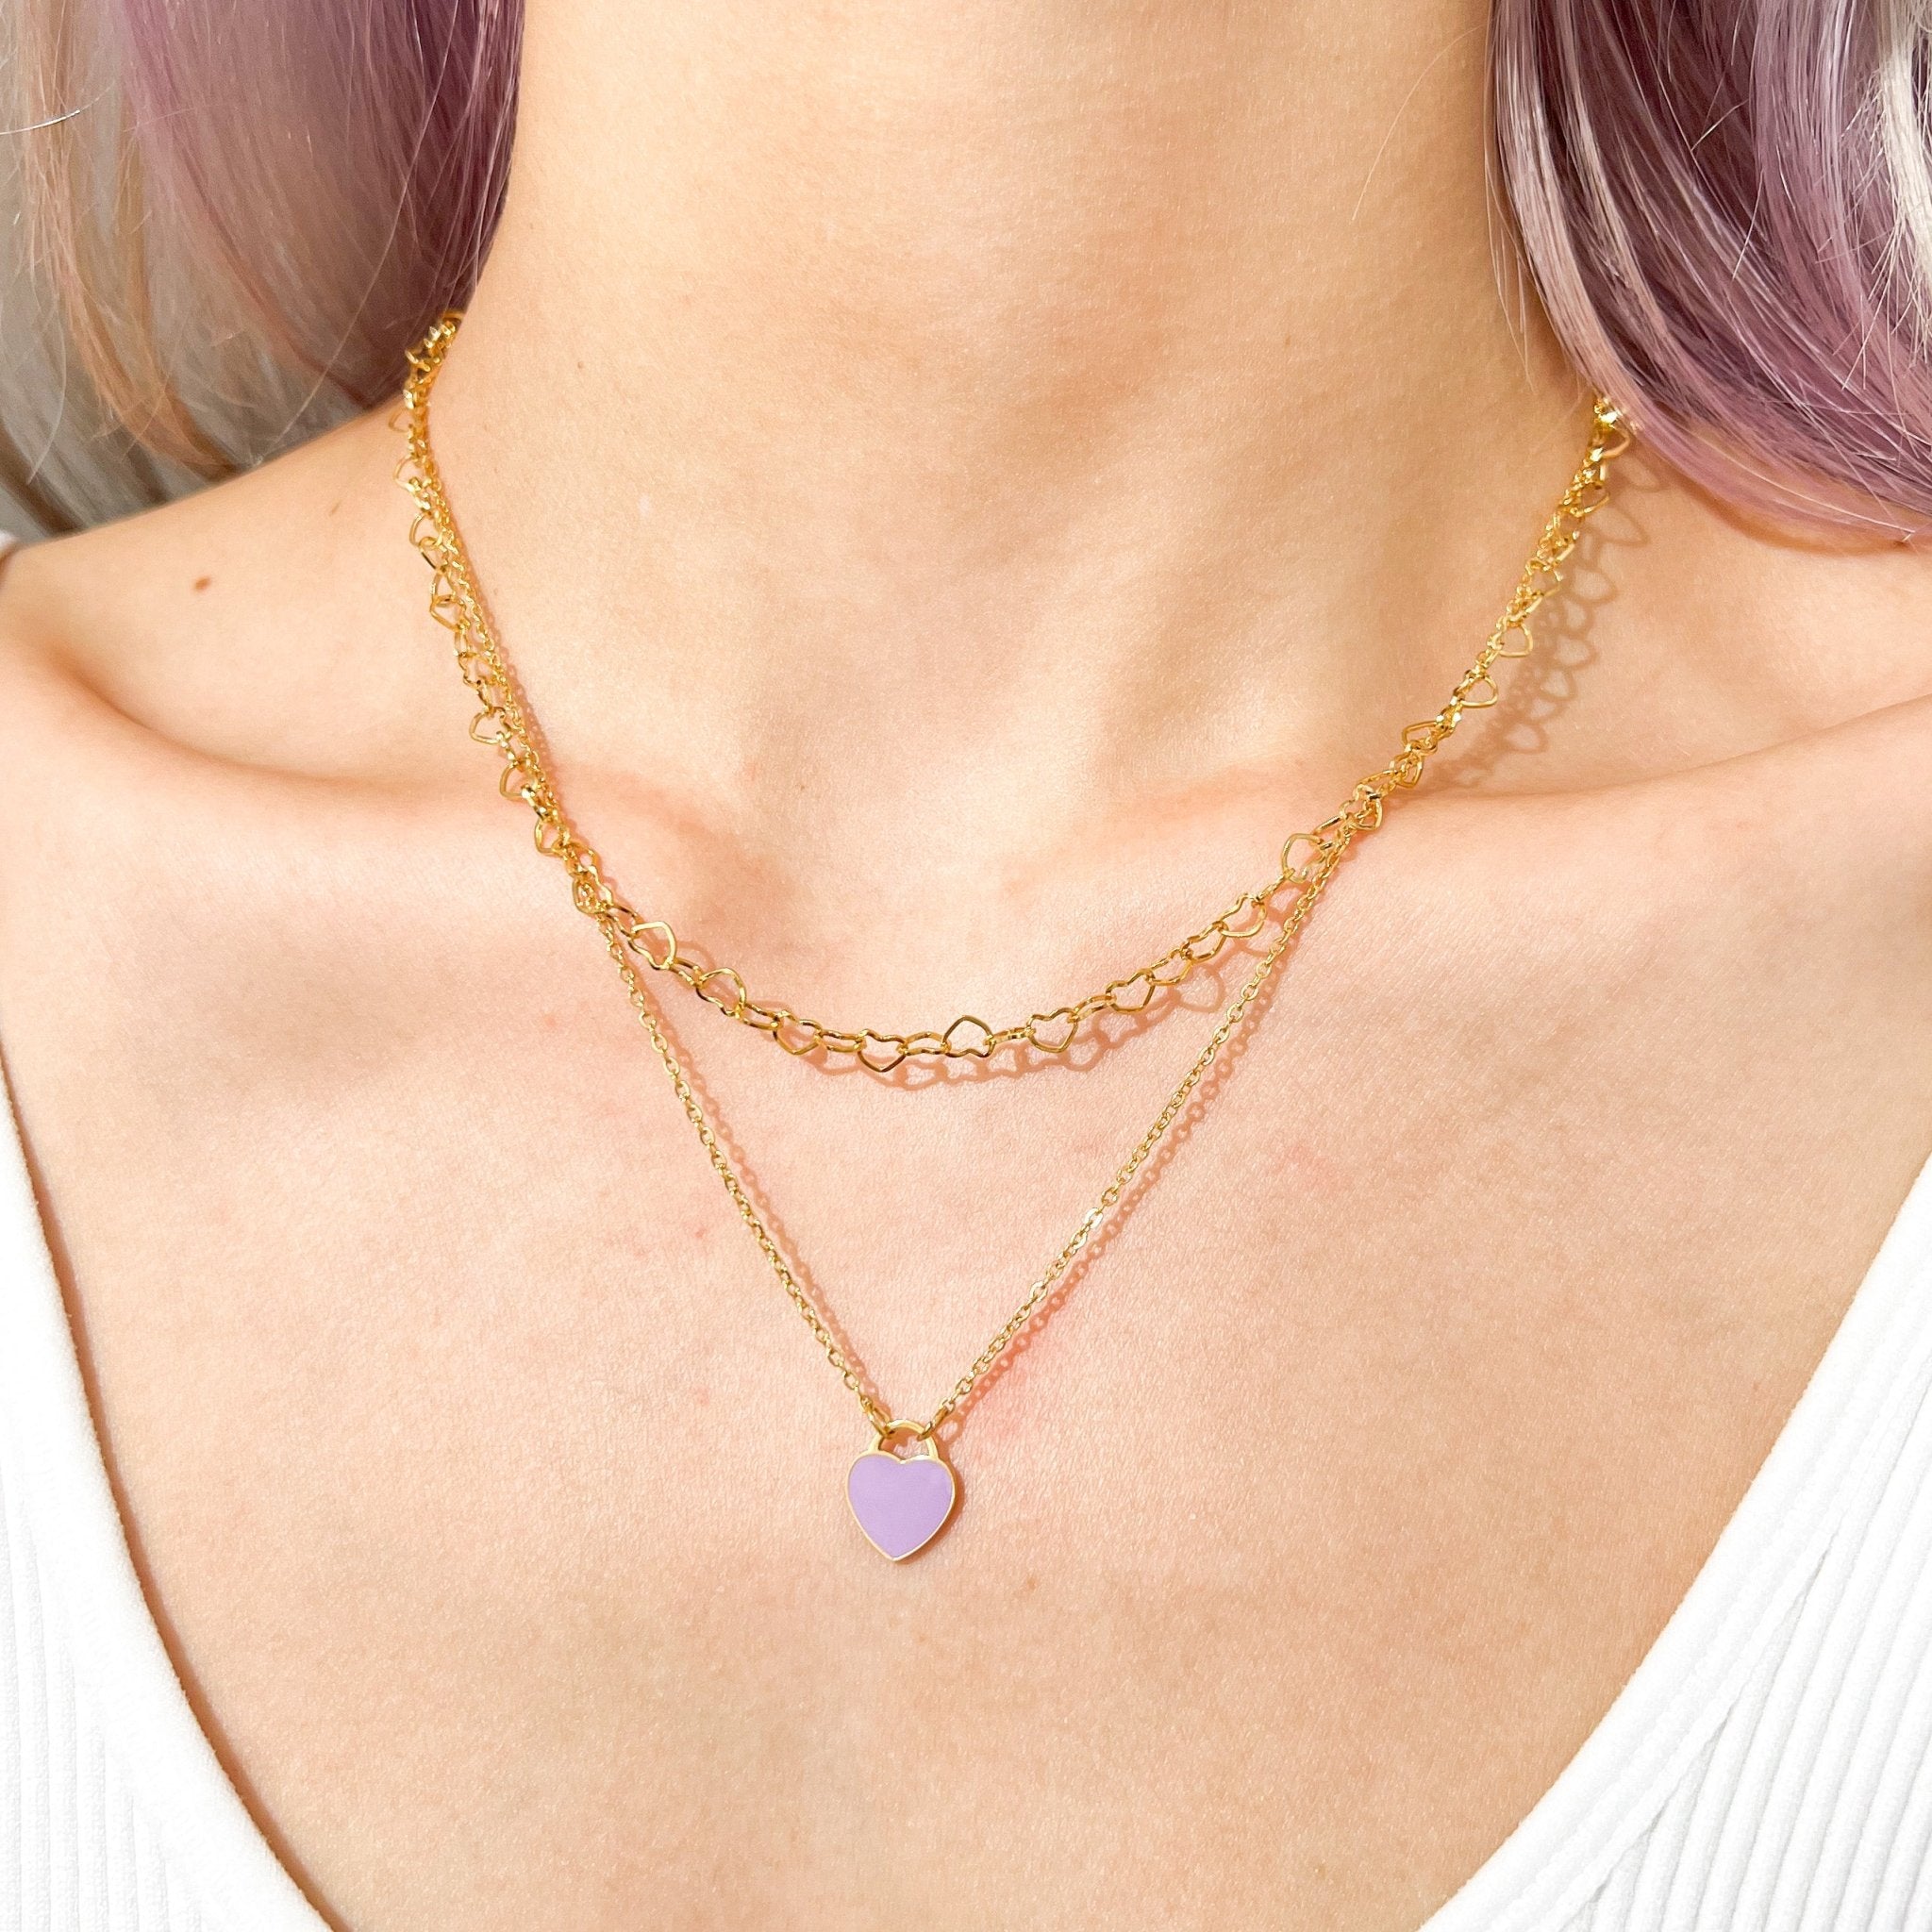 Celia Heart Chain Necklace in Gold - Flaire & Co.